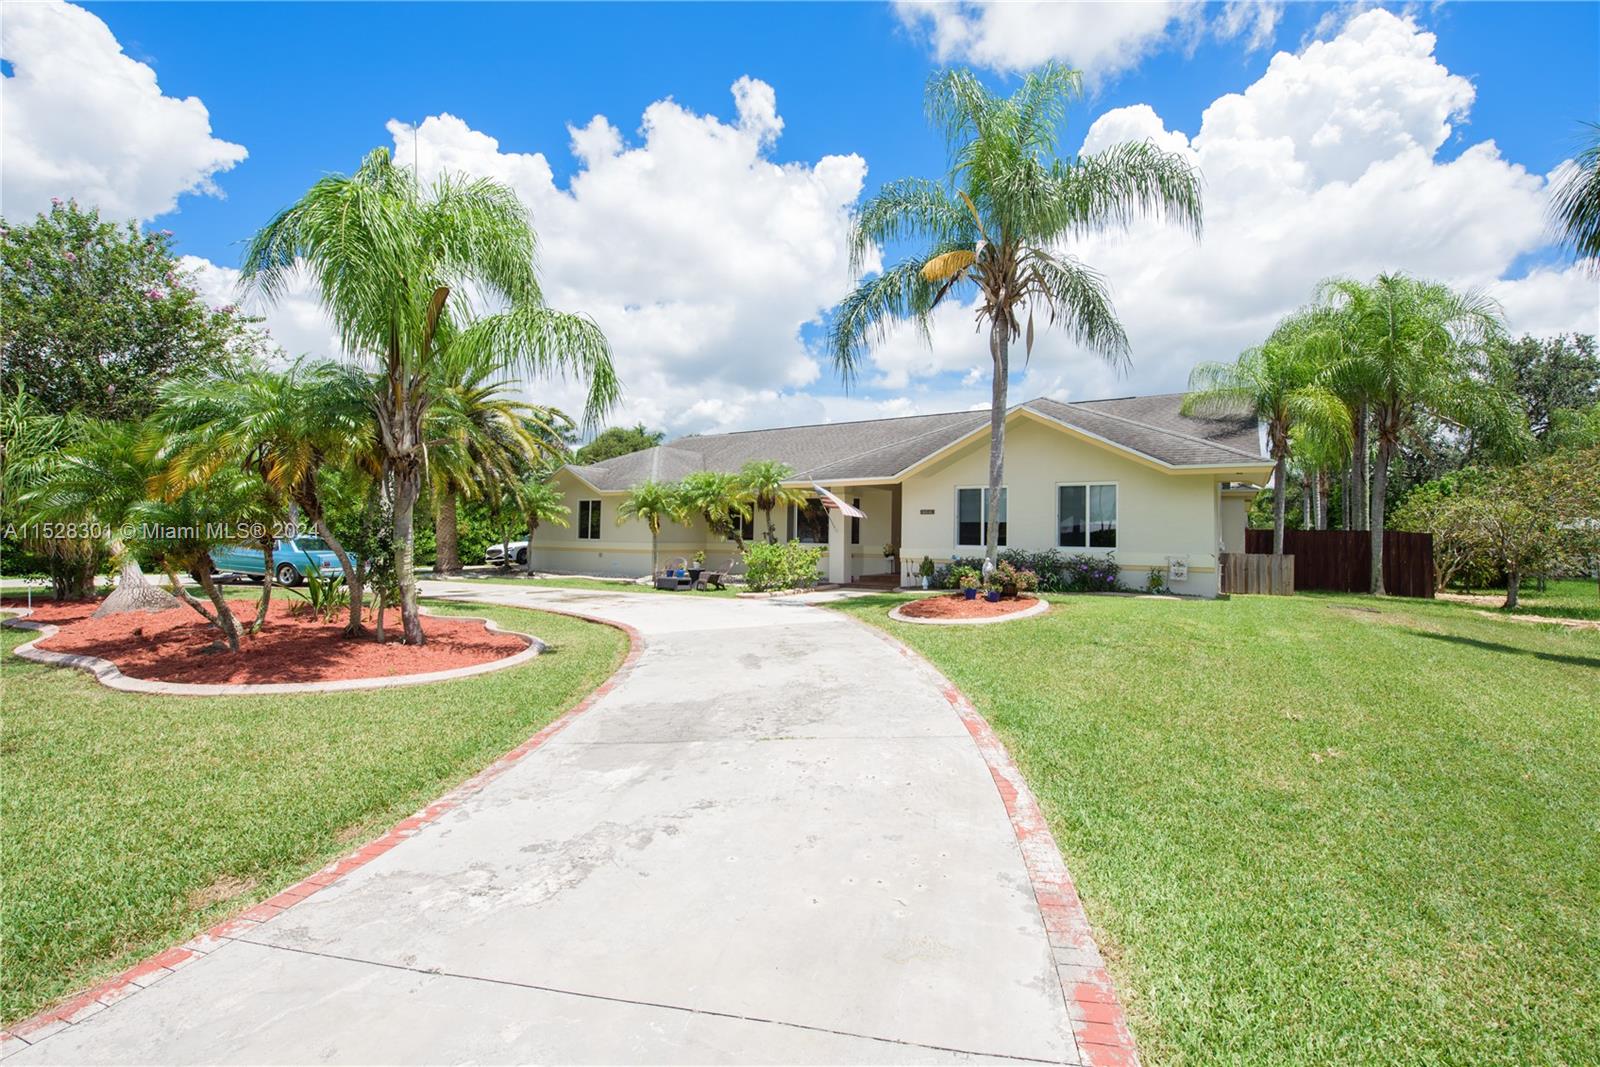 16941 Sw 277th St St, Homestead, Miami-Dade County, Florida - 5 Bedrooms  
3 Bathrooms - 